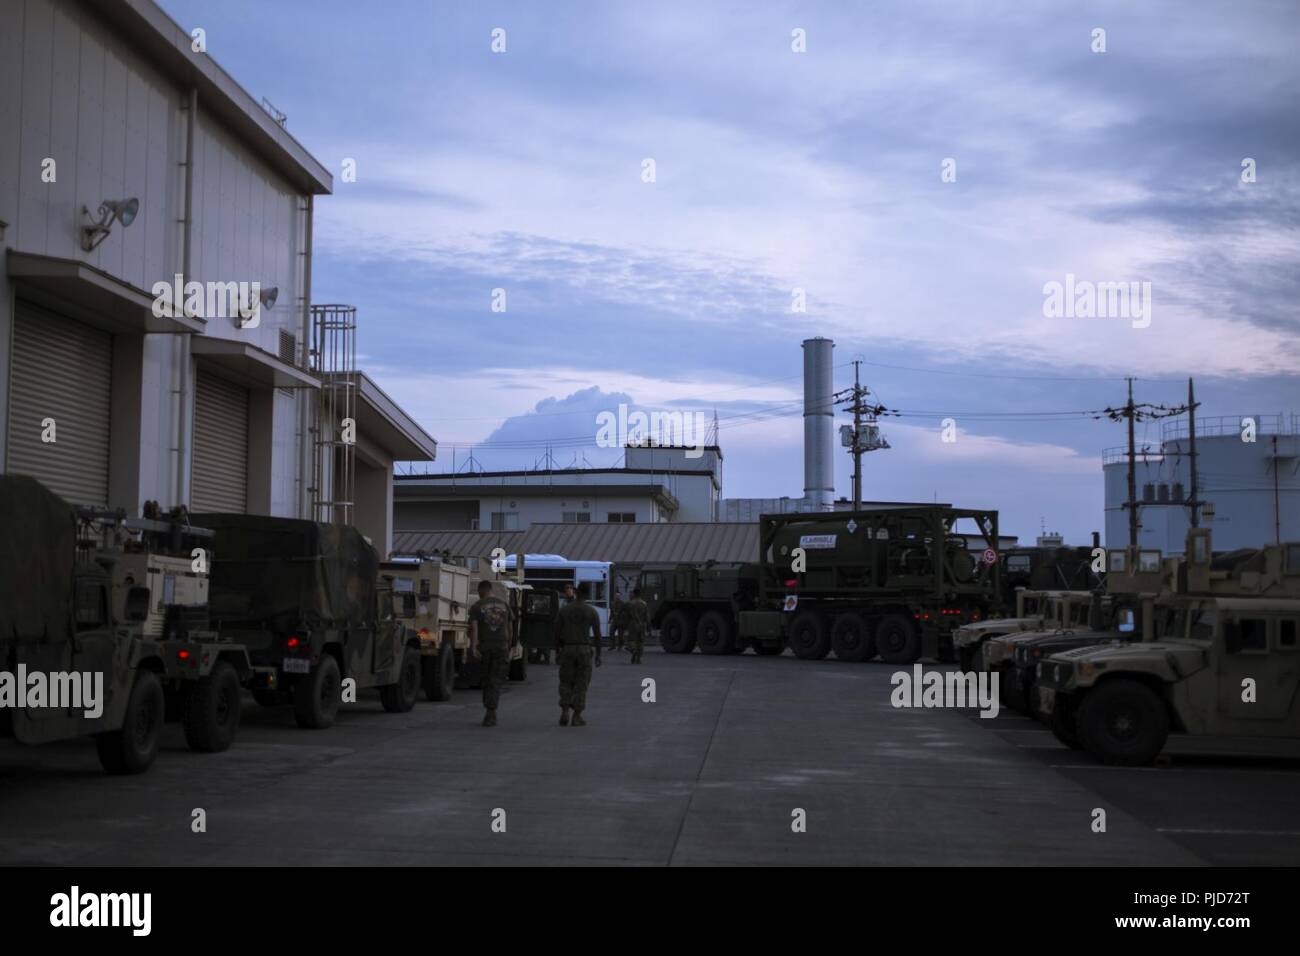 U.S. Marines with Marine Wing Support Squadron (MWSS) 171 inspect tactical vehicles before a convoy at Marine Corps Air Station Iwakuni, Japan, July 13, 2018. The convoy took service members with MWSS-171 to Combined Arms Training Center (CATC) Camp Fuji in order to begin exercise Eagle Wrath 18, an annual training exercise assessing the squadron’s combat readiness. Stock Photo